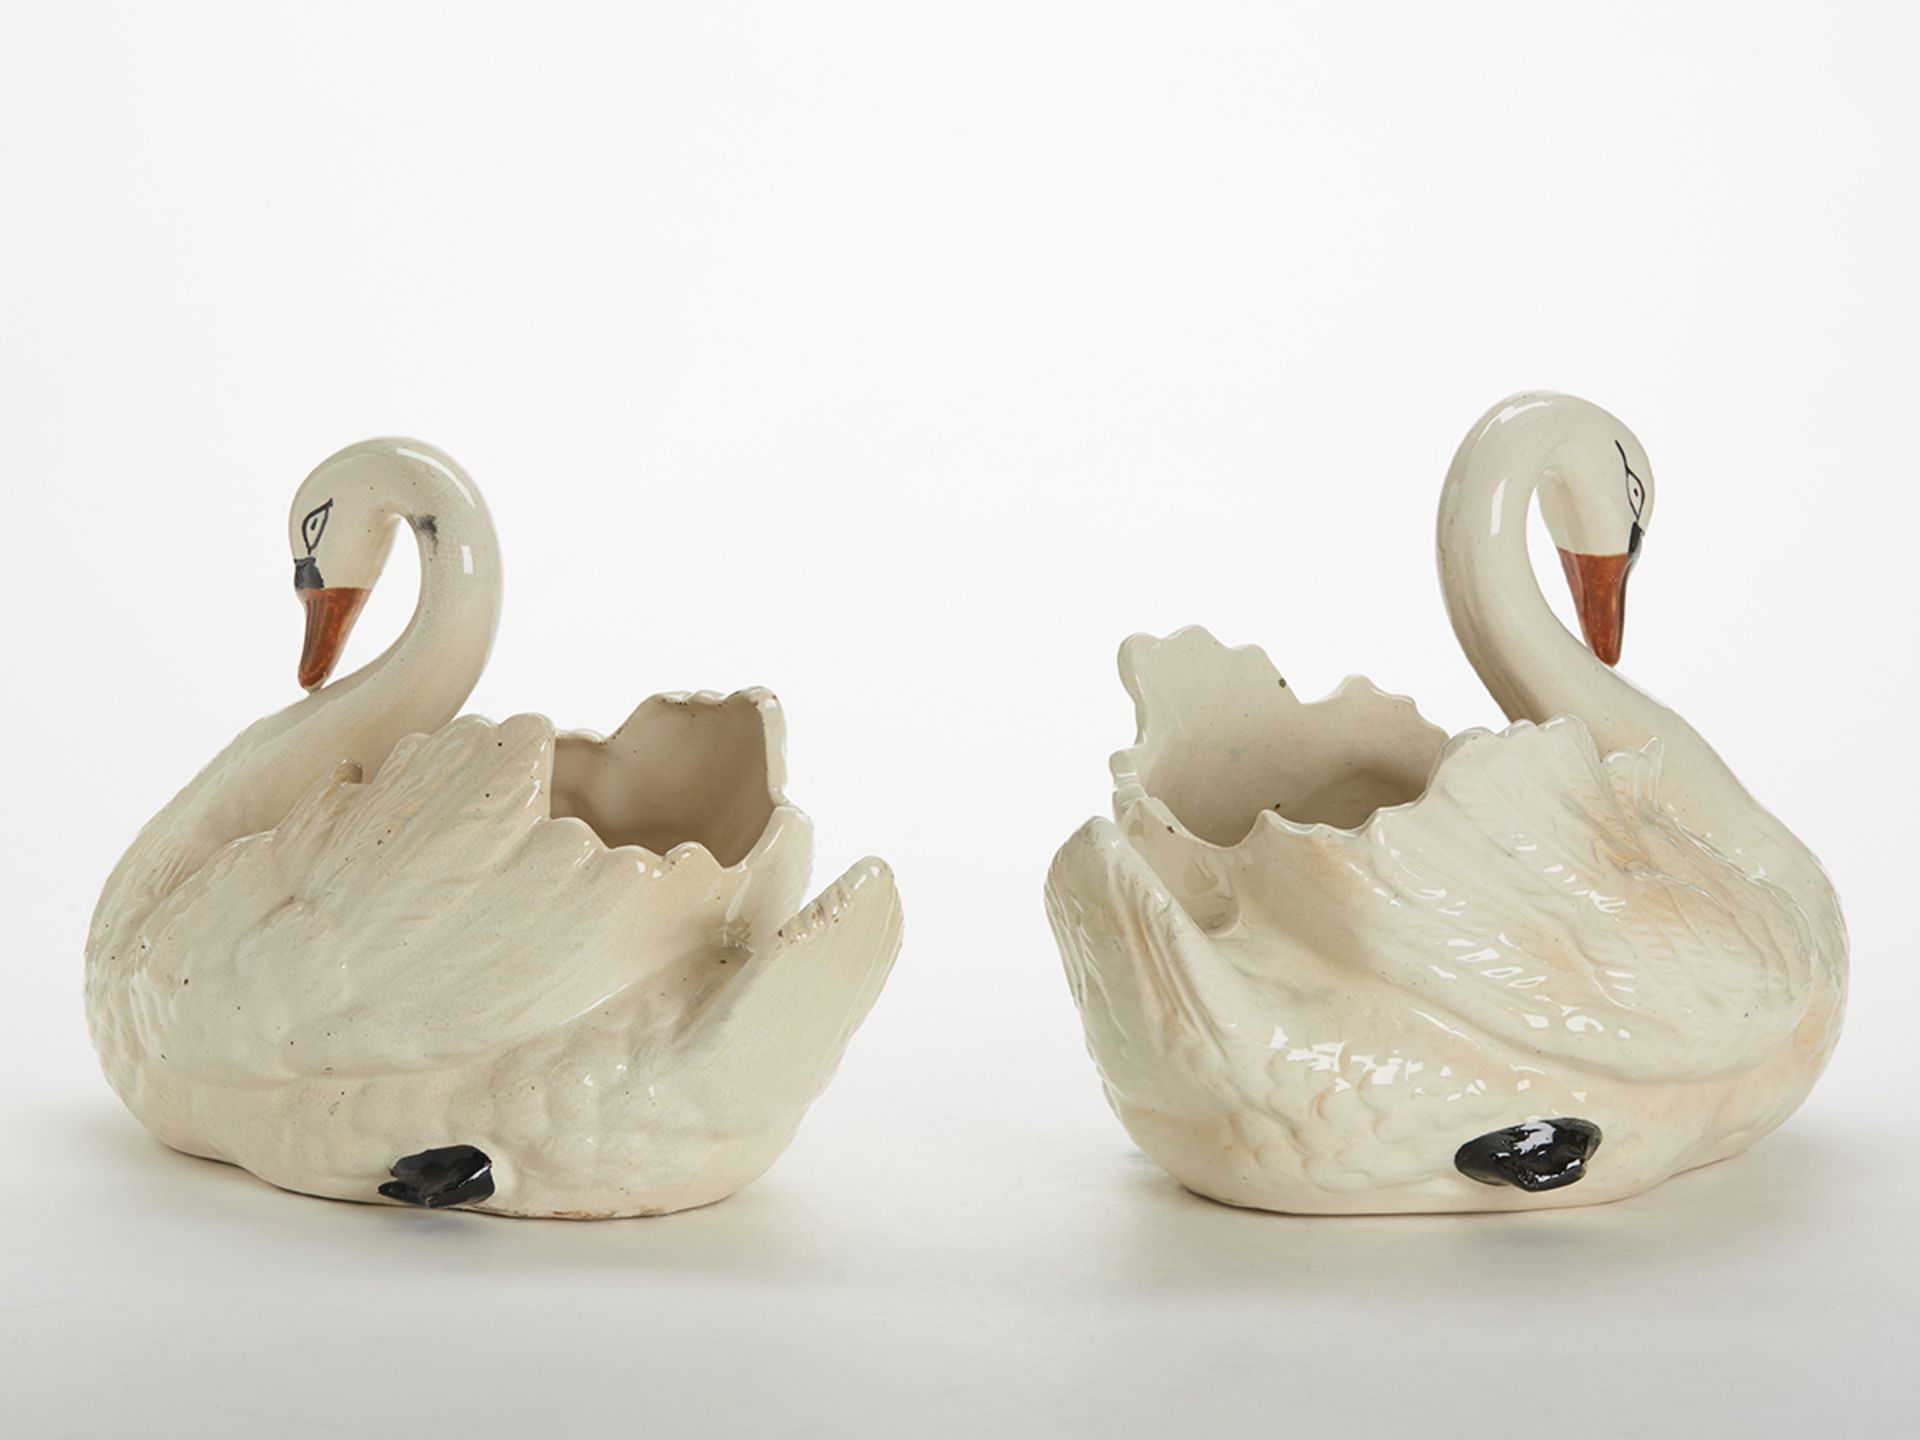 ANTIQUE PAIR STAFFORDSHIRE SWAN PLANTERS 19TH C. - Image 4 of 11